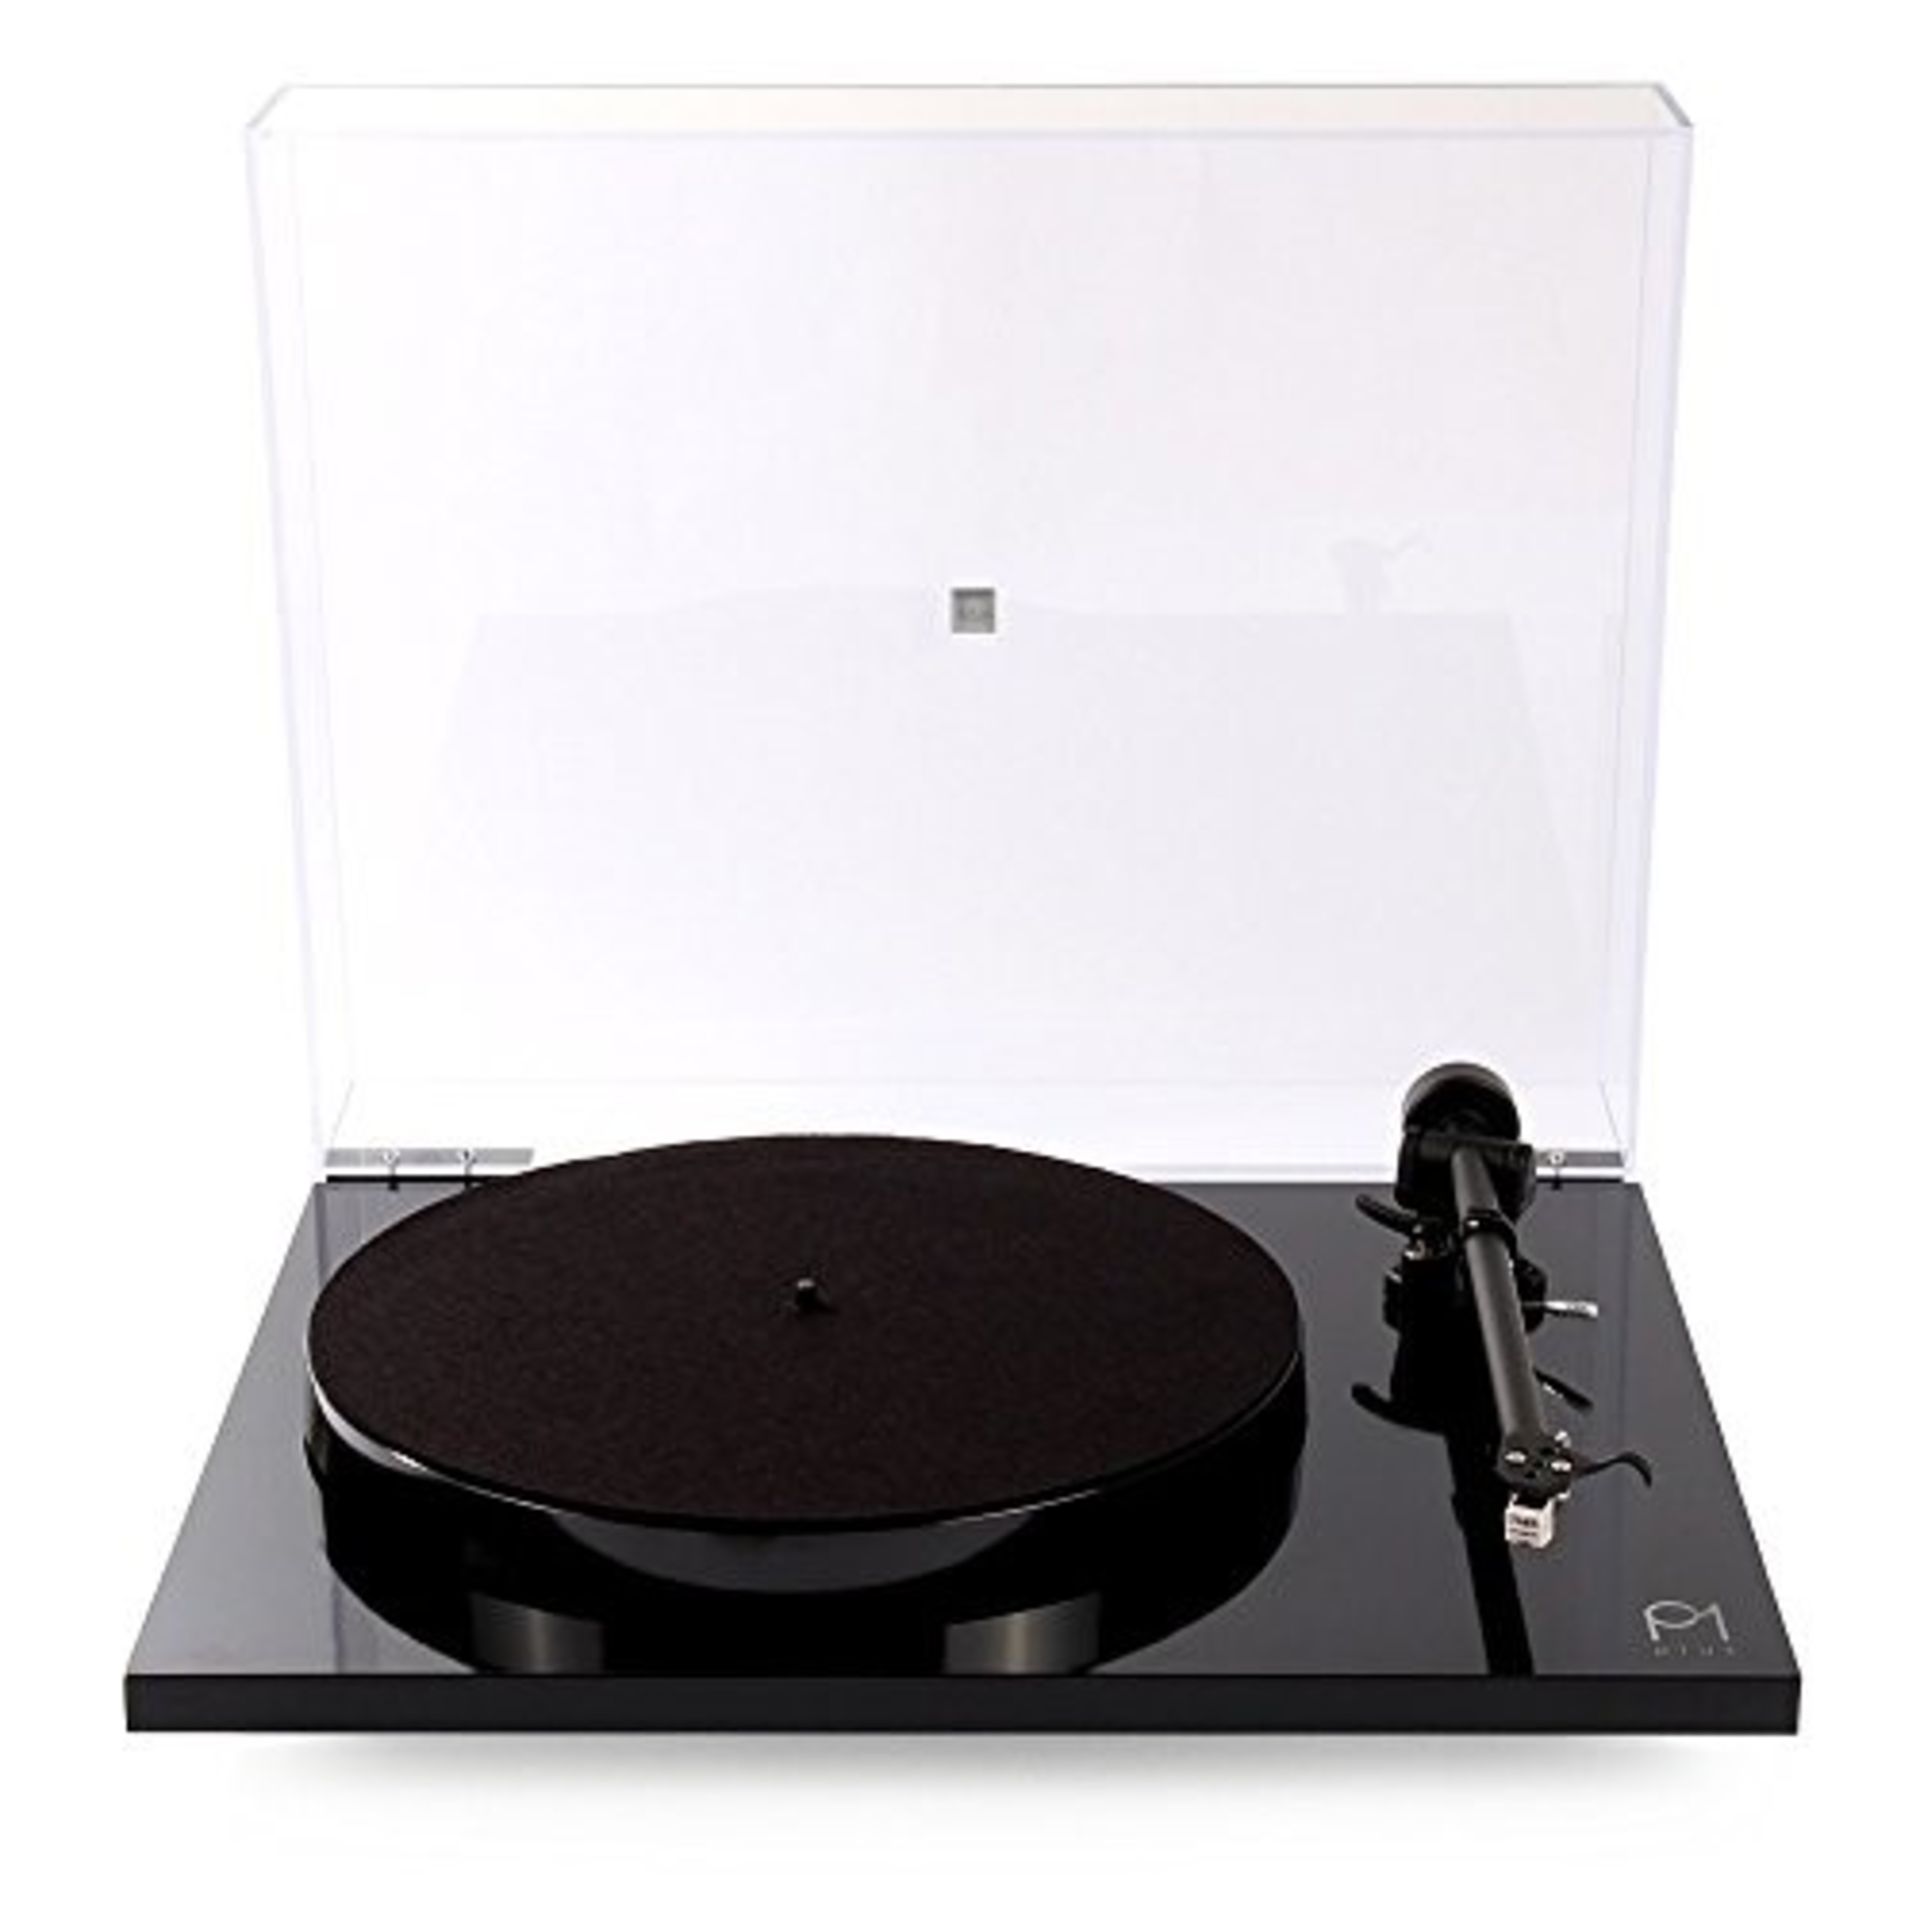 RRP £305.00 Rega Planar 1 Plus Turntable with Built-in Phono Stage Gloss Black